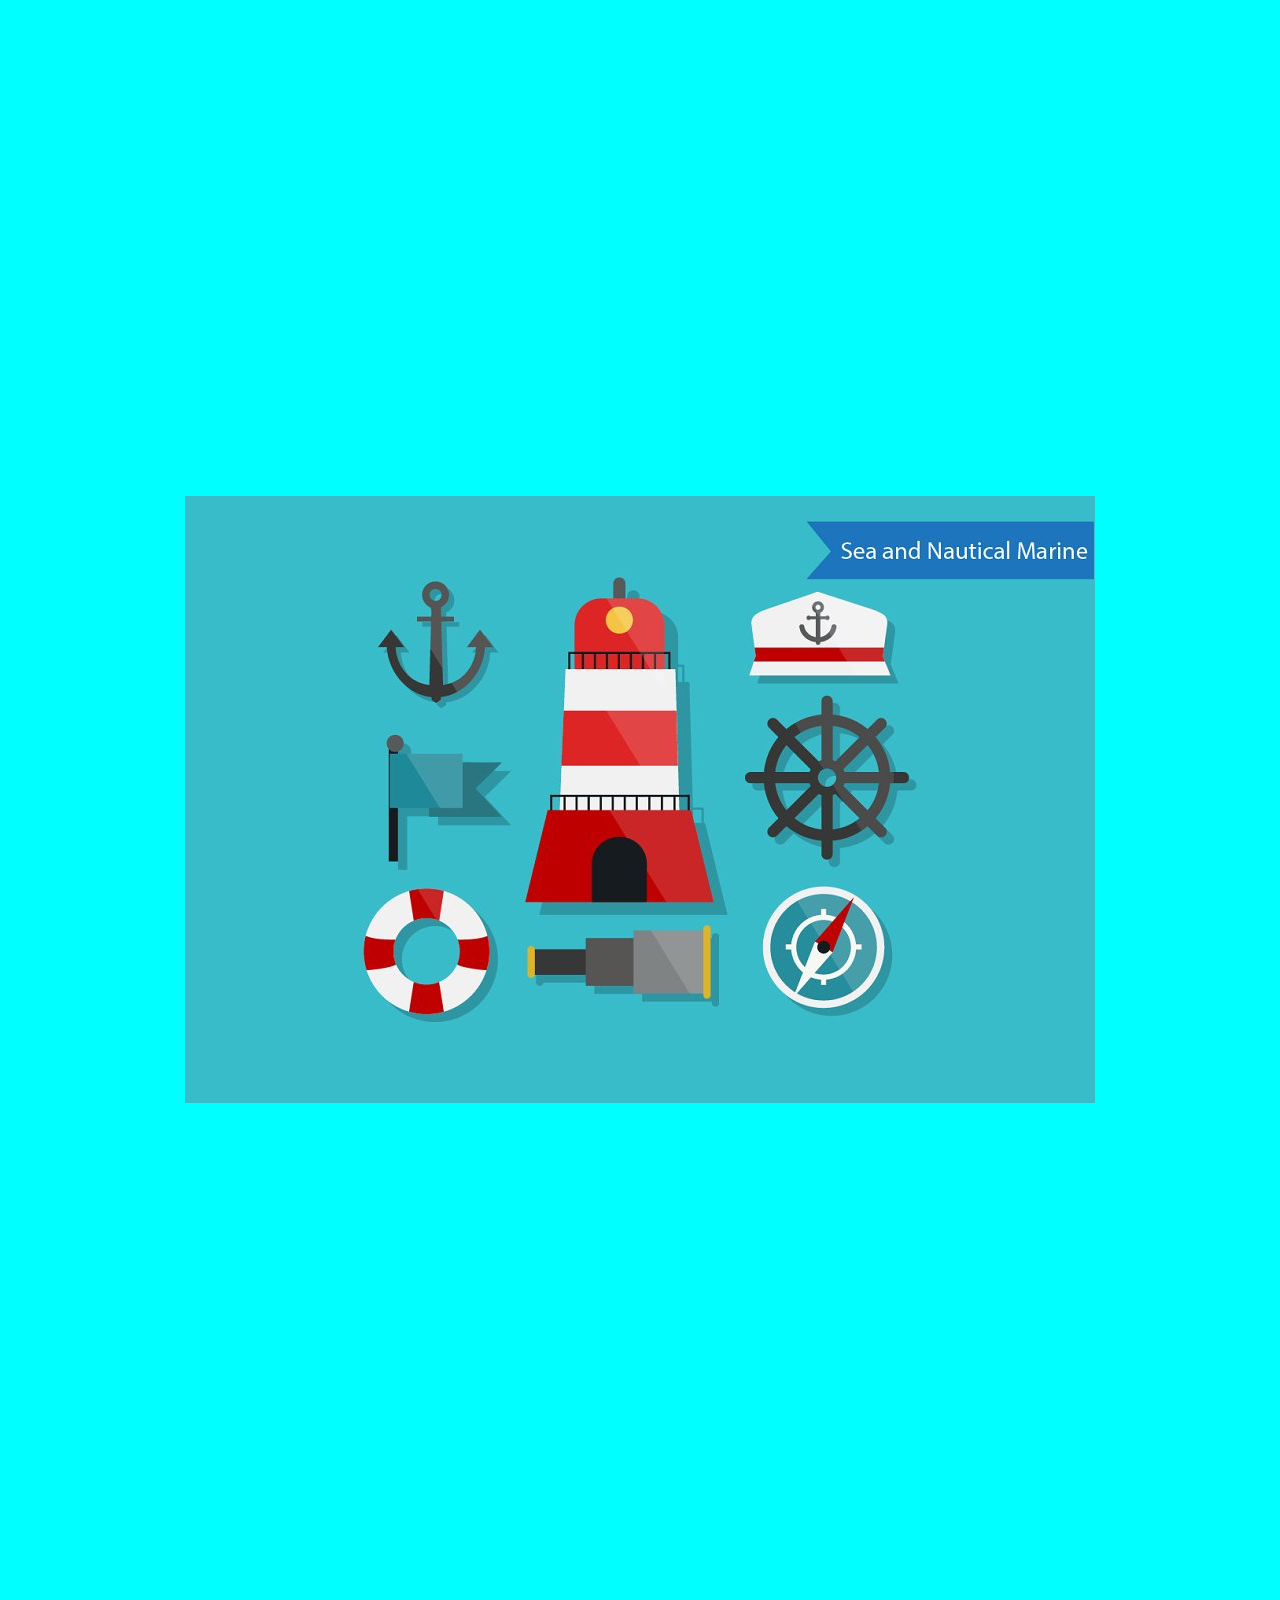 Sea and nautical marine flat design pinterest image preview.